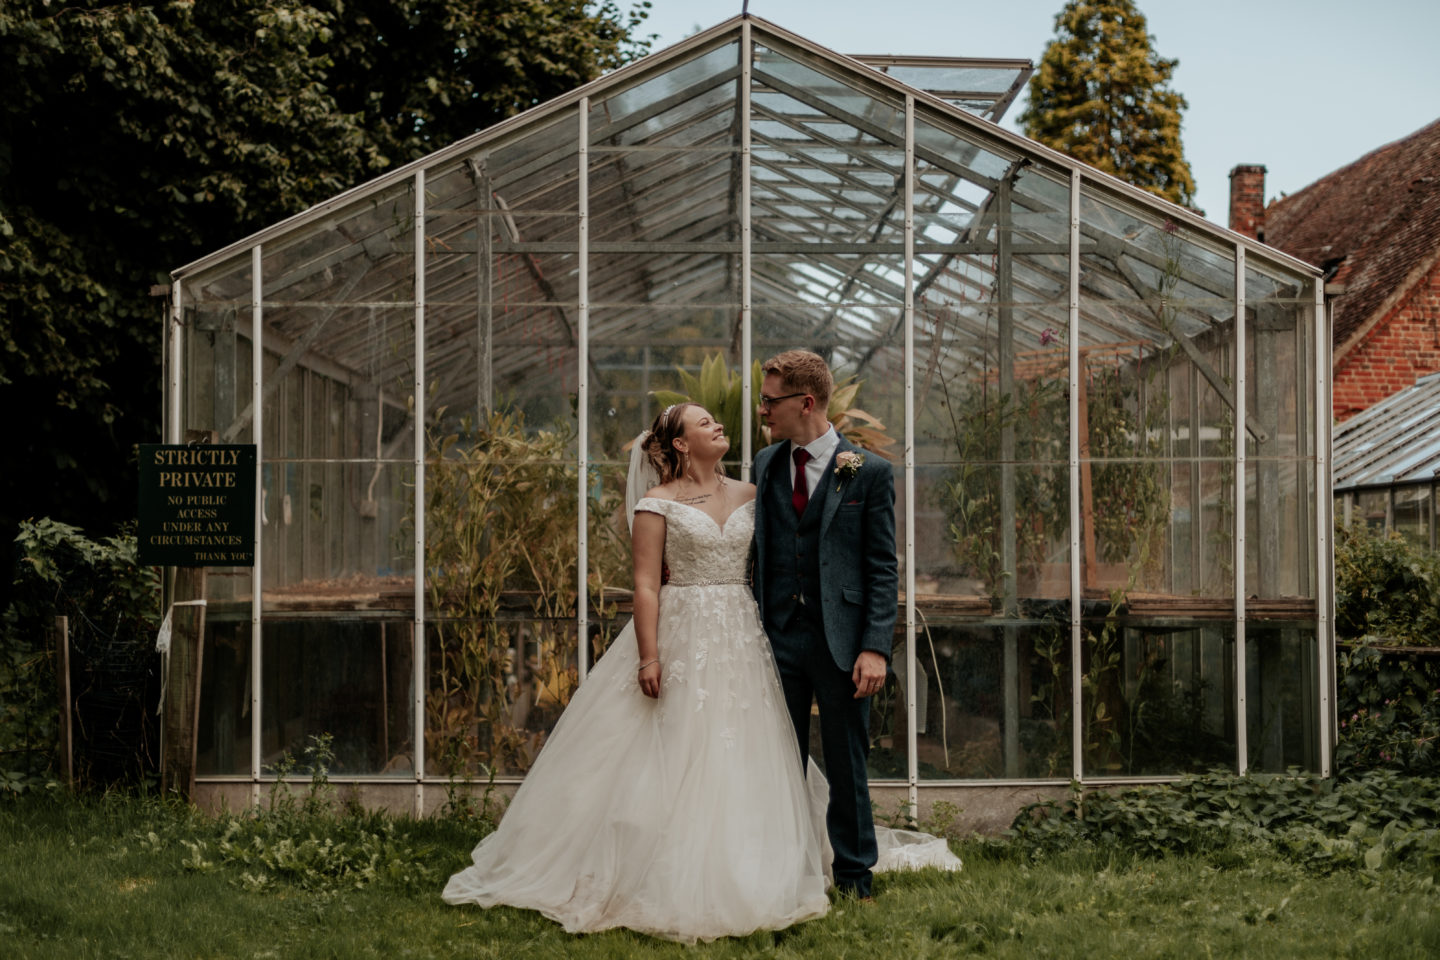 Rustic Wedding With Ballgown Wedding Dress At The Old Mill, Reading